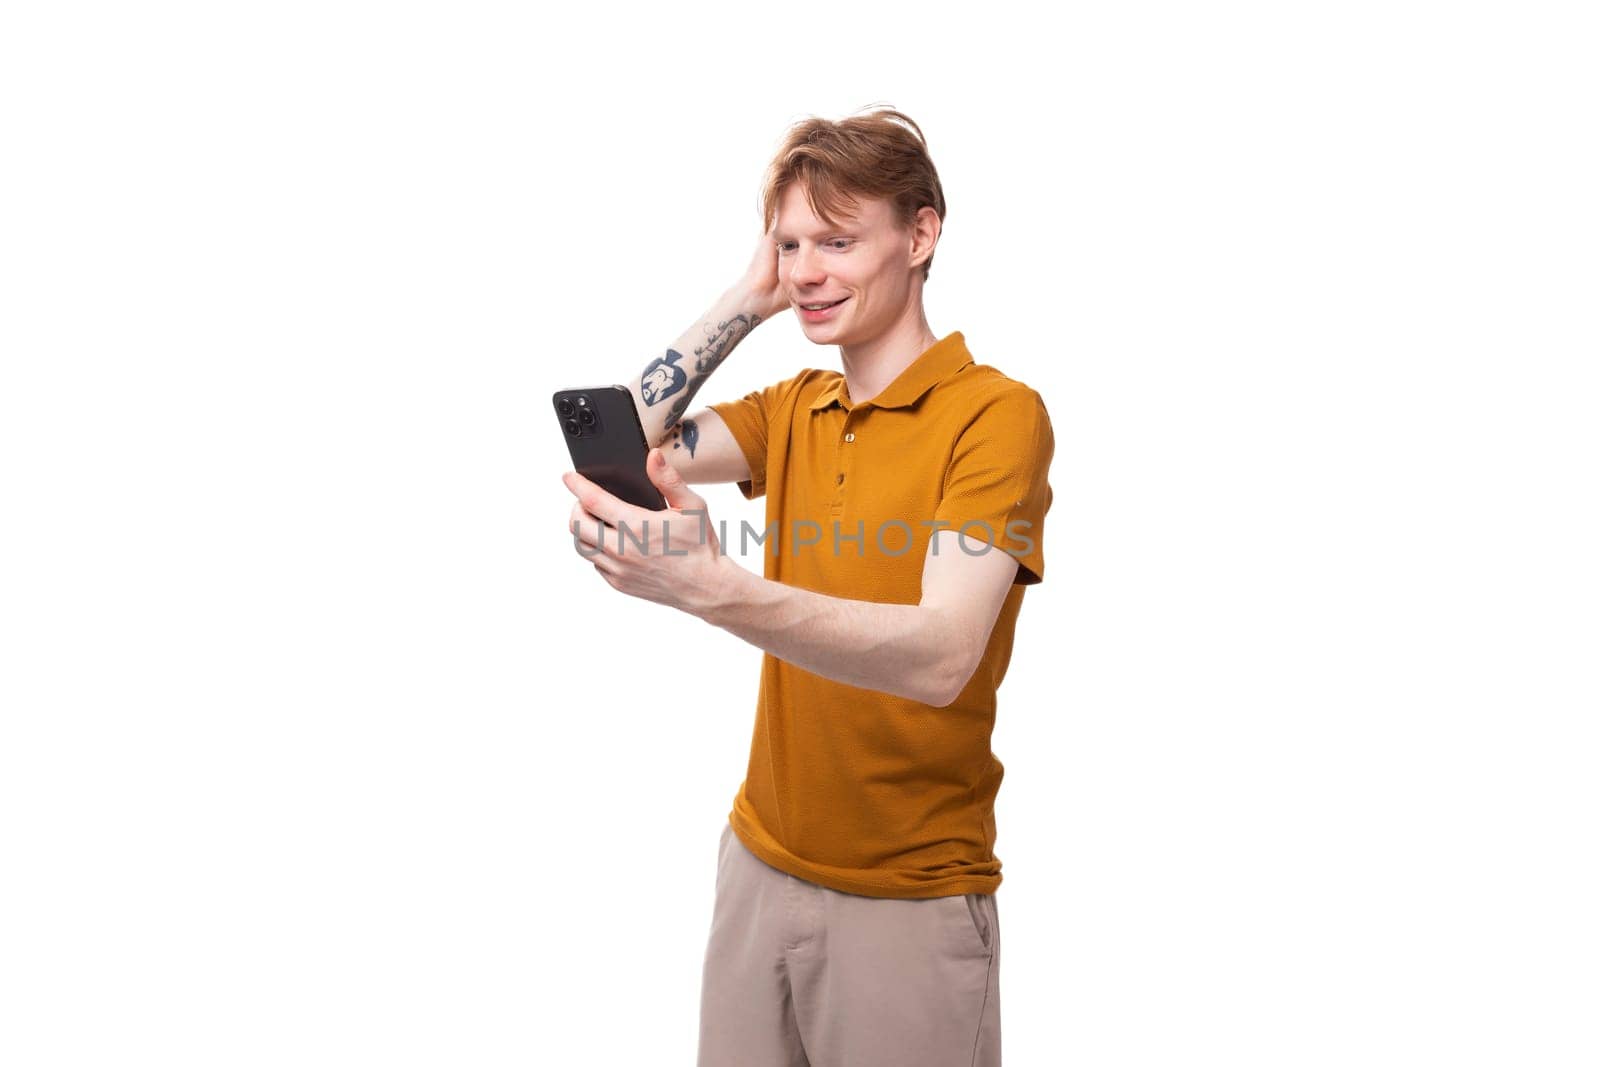 a young guy with short red hair dressed in a summer T-shirt uses social networks in a smartphone by TRMK